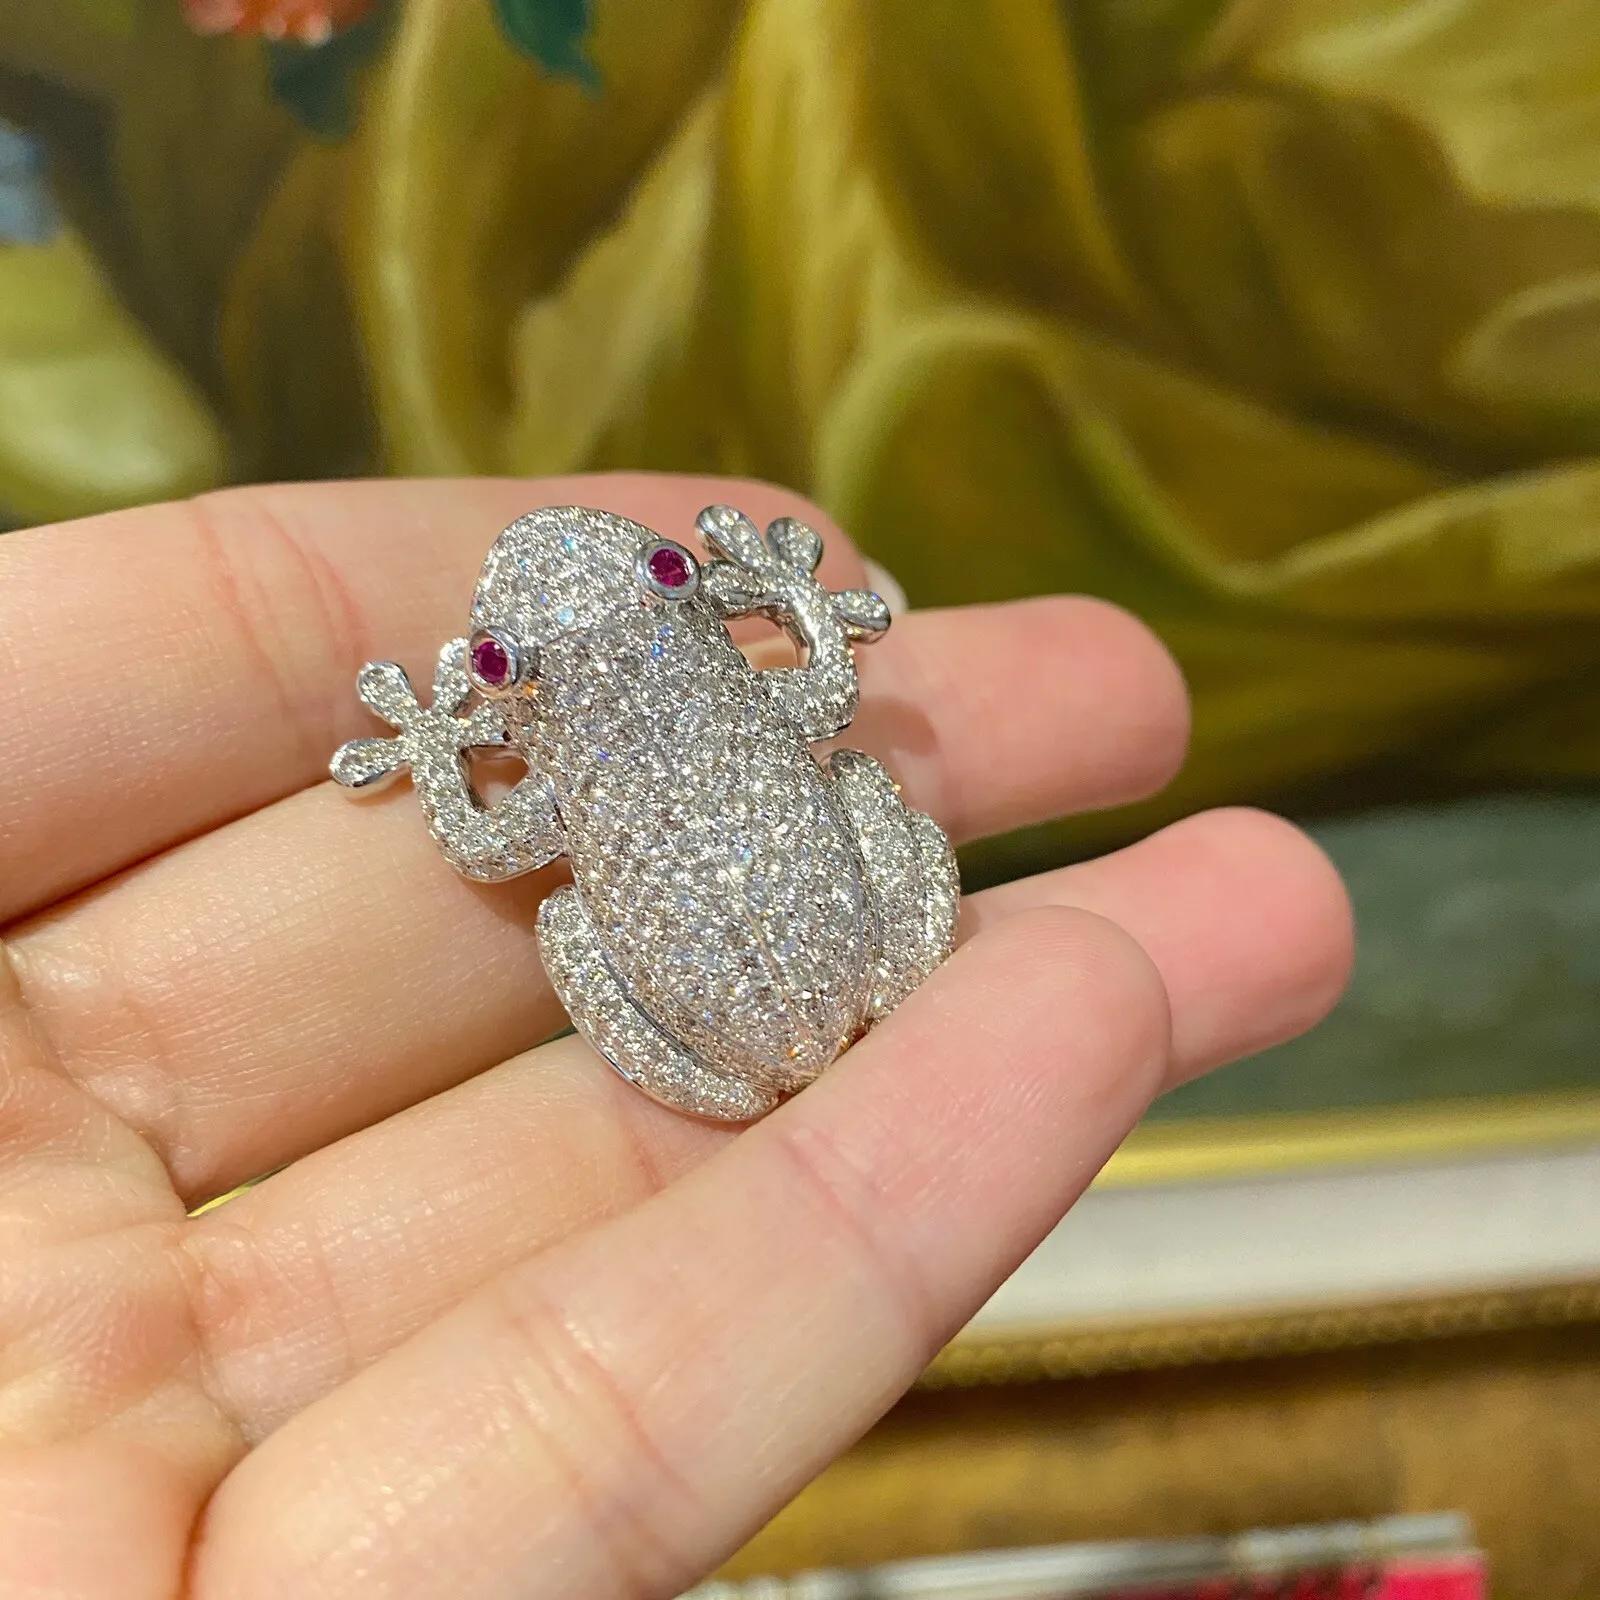 Diamond Pave Tree Frog Pin Brooch in 18k White Gold

Diamond Frog Pin features 3.77 carats of pave set Round Brilliant Diamonds with two Ruby eyes, all set in 18k White Gold.

Total diamond weight is 3.77 carats.
Total Ruby weight is 0.10